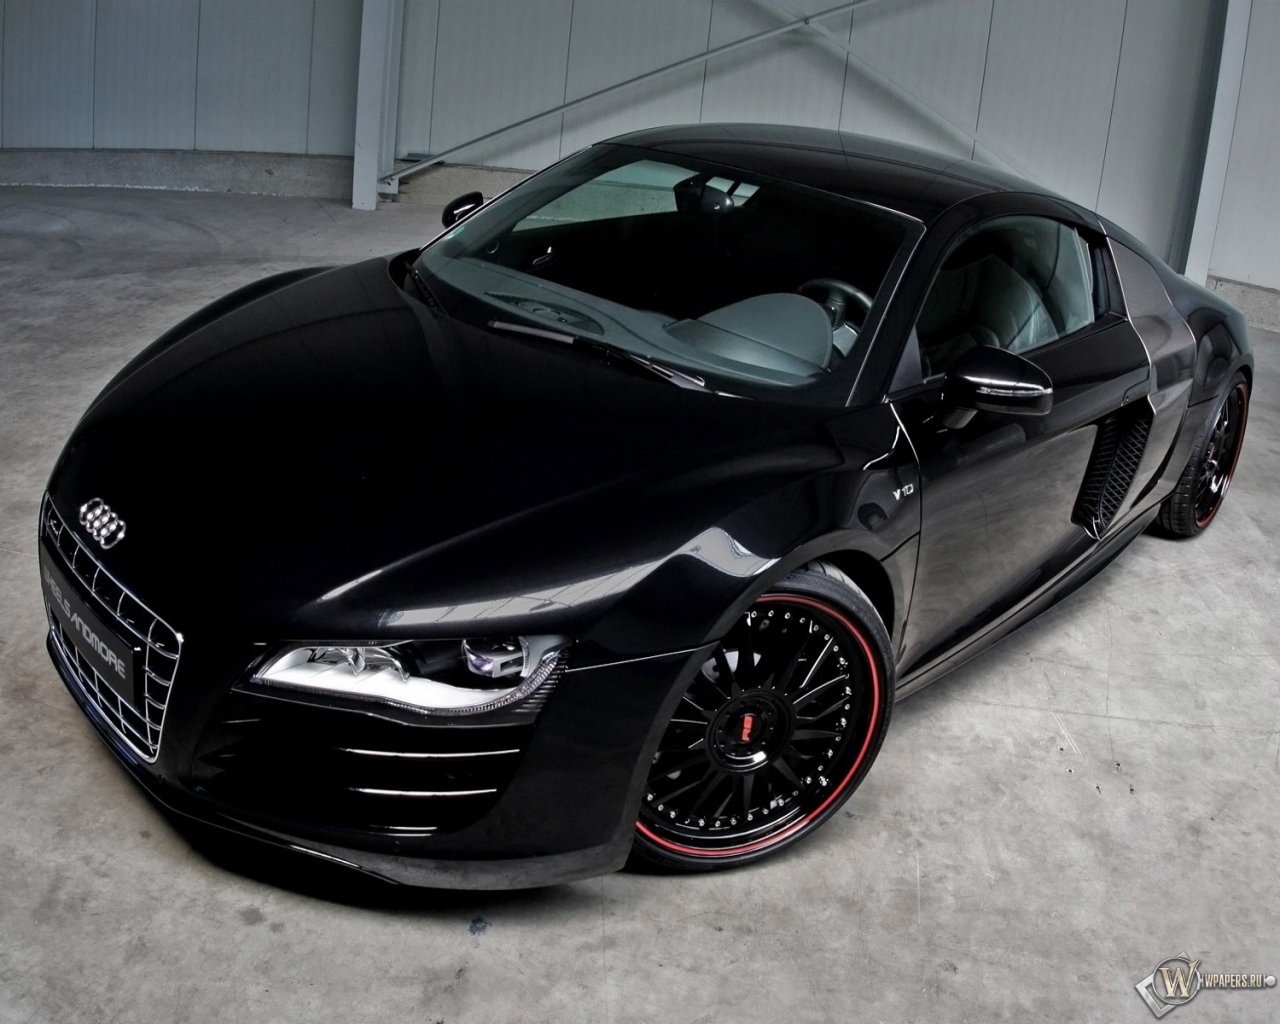 2011 Wheelsandmore Audi R8 V10 .6 - Front Angle Top 1280x1024